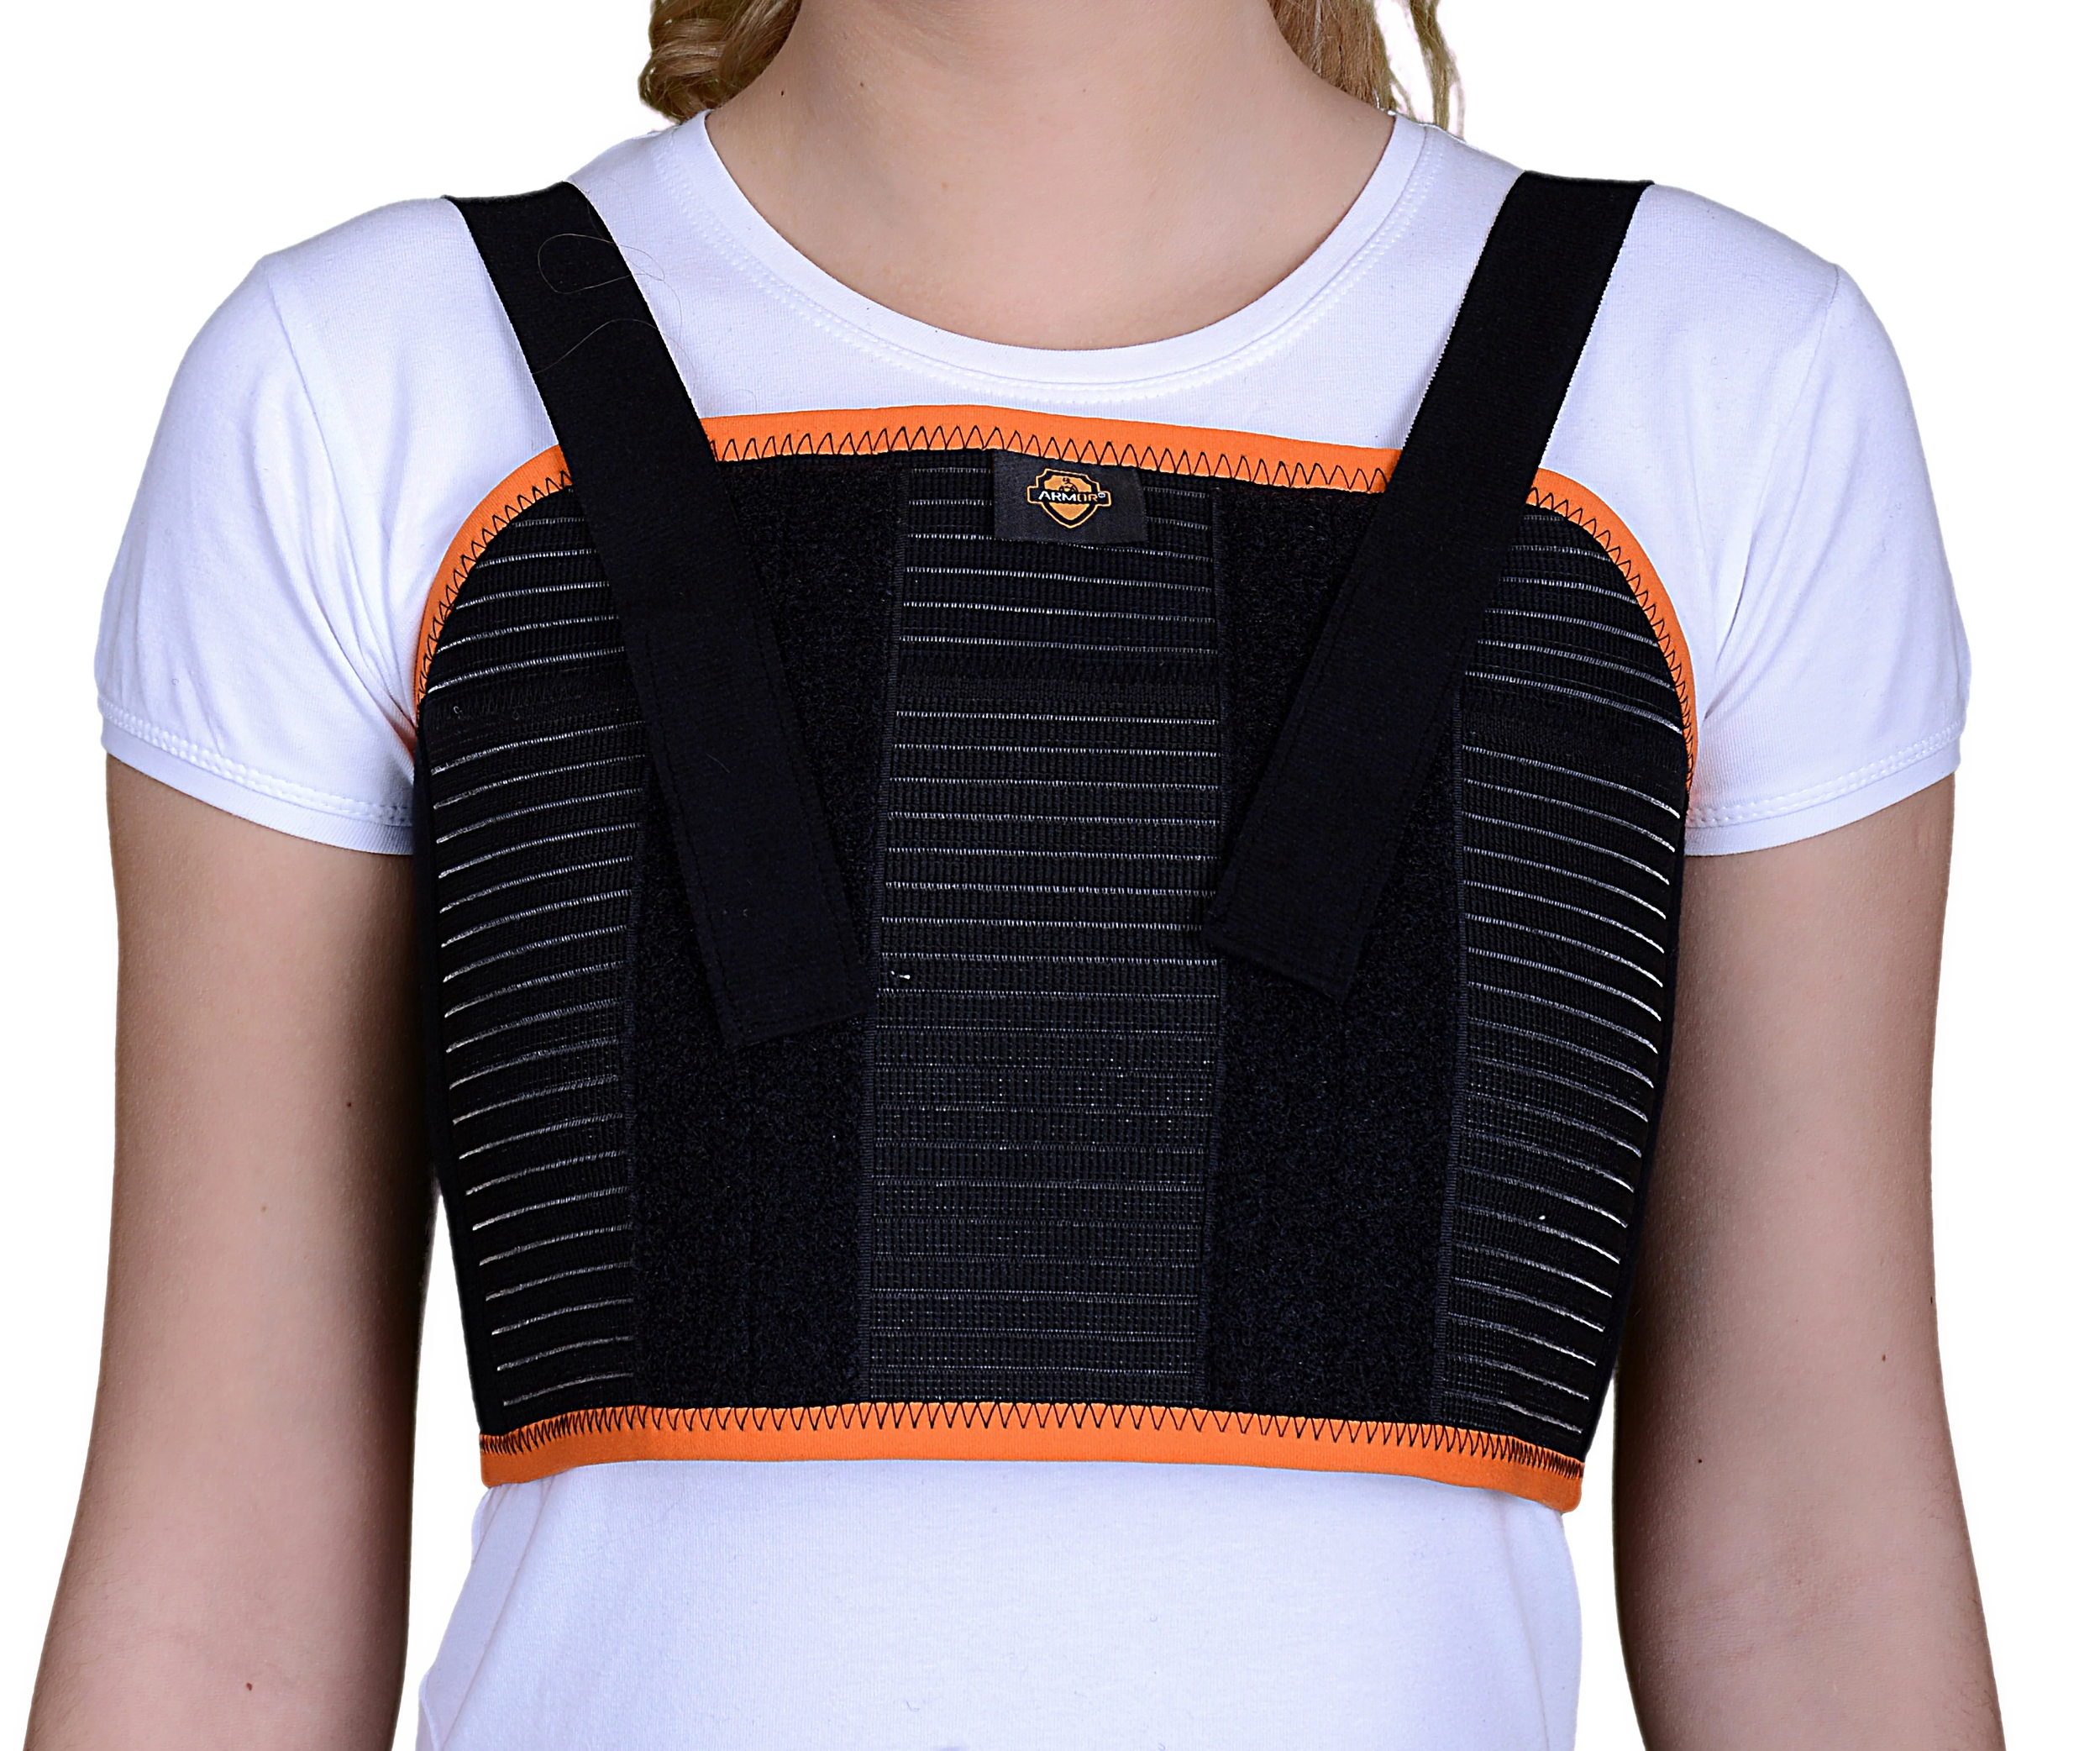 Post Open Heart Thoracic Surgery Rib & Chest Support Brace with 2